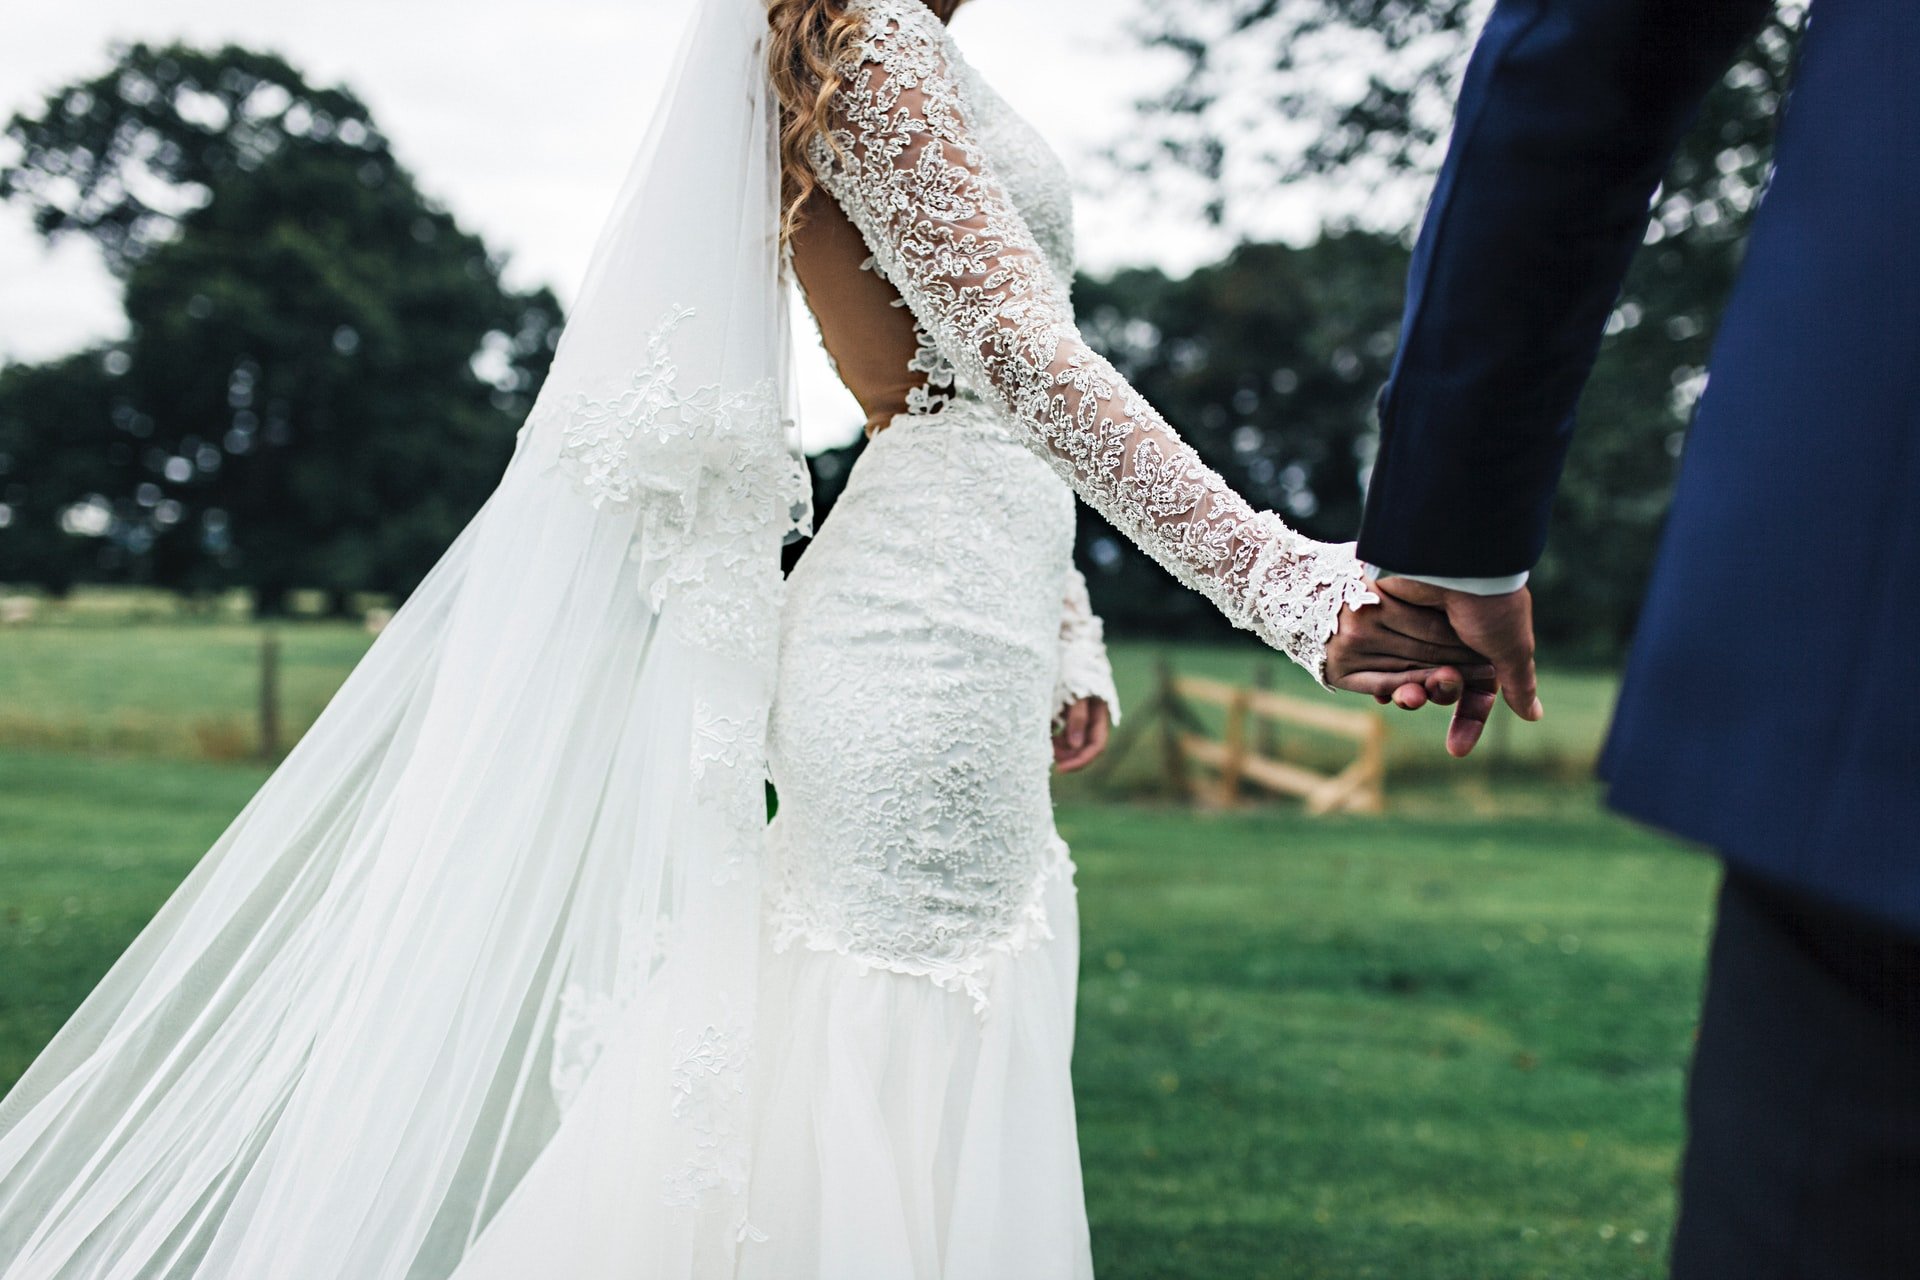 He married his wife five years after dating her. | Source: Unsplash